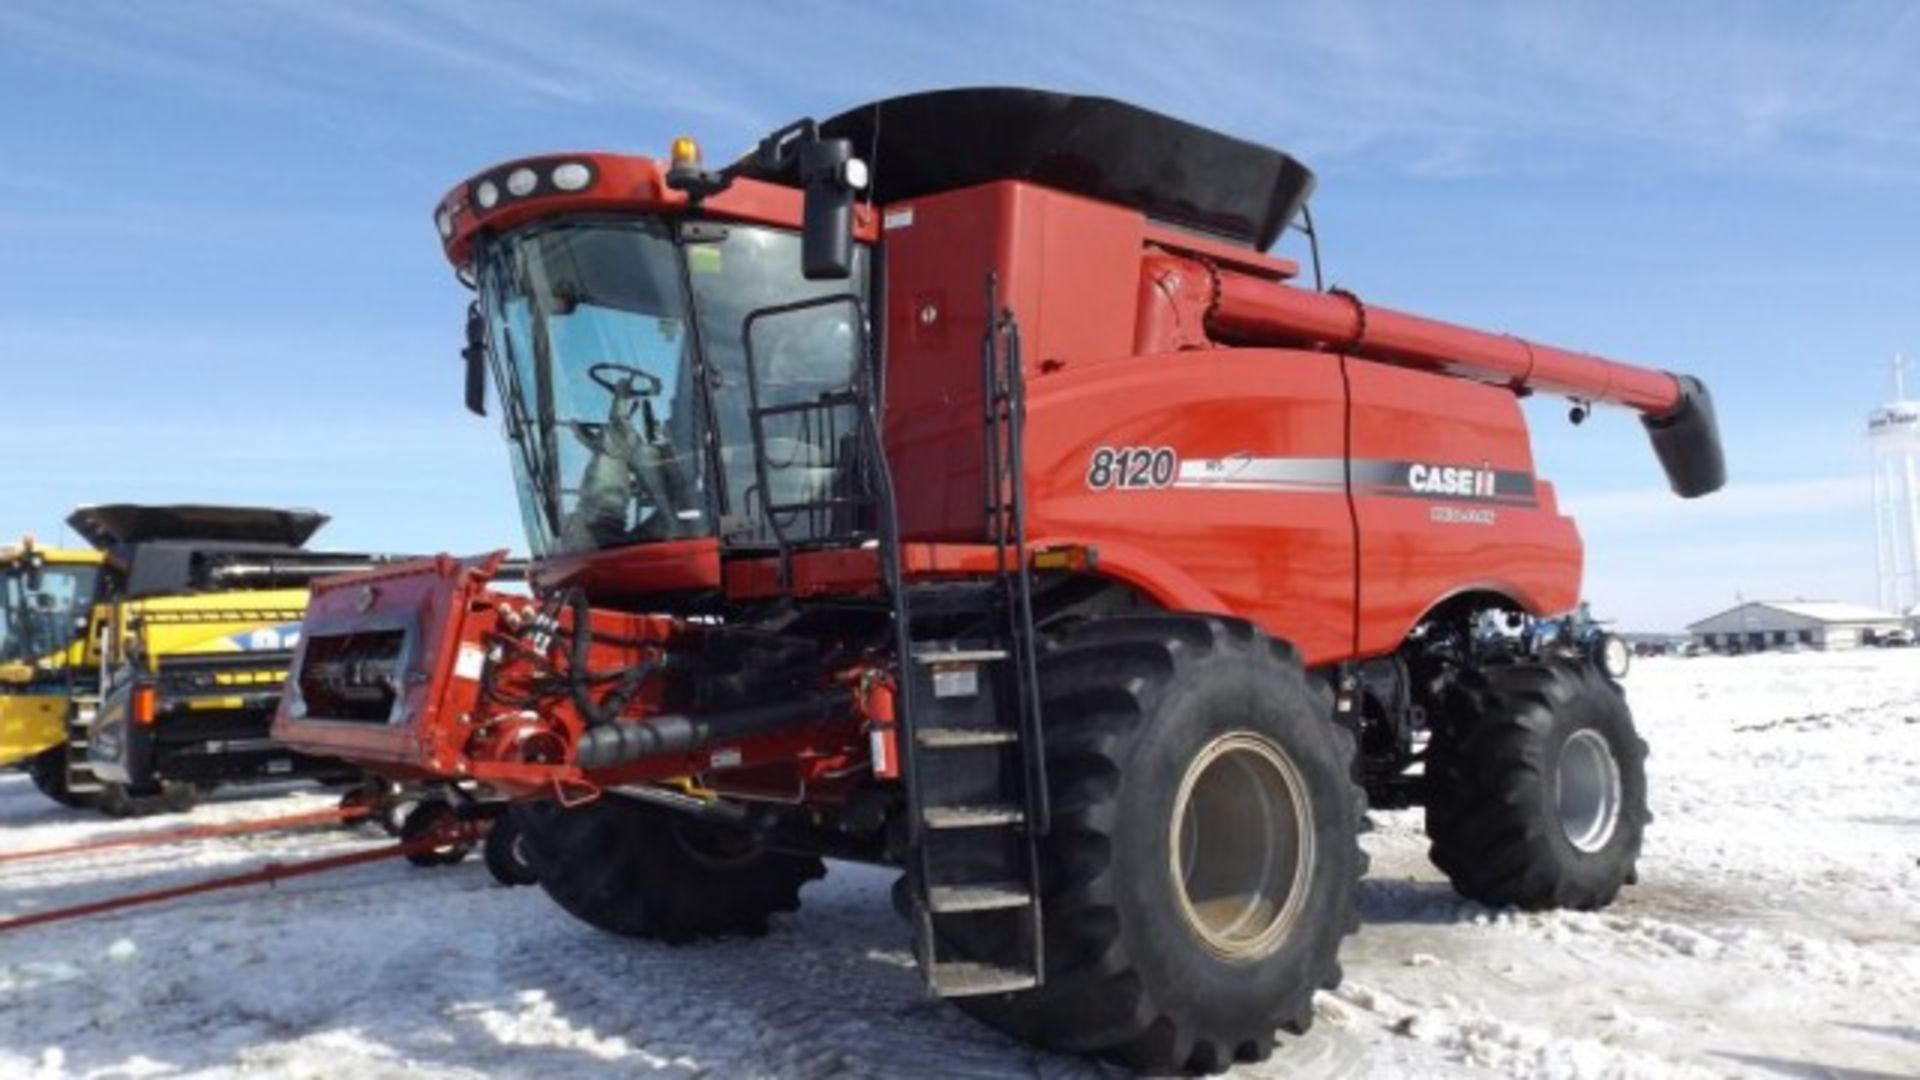 Case IH 8120 AFS Combine '11, sn#YBG211480 2 Speed Powered Rear Axle AGR, 420 HP, Autoguide Ready, - Image 4 of 37